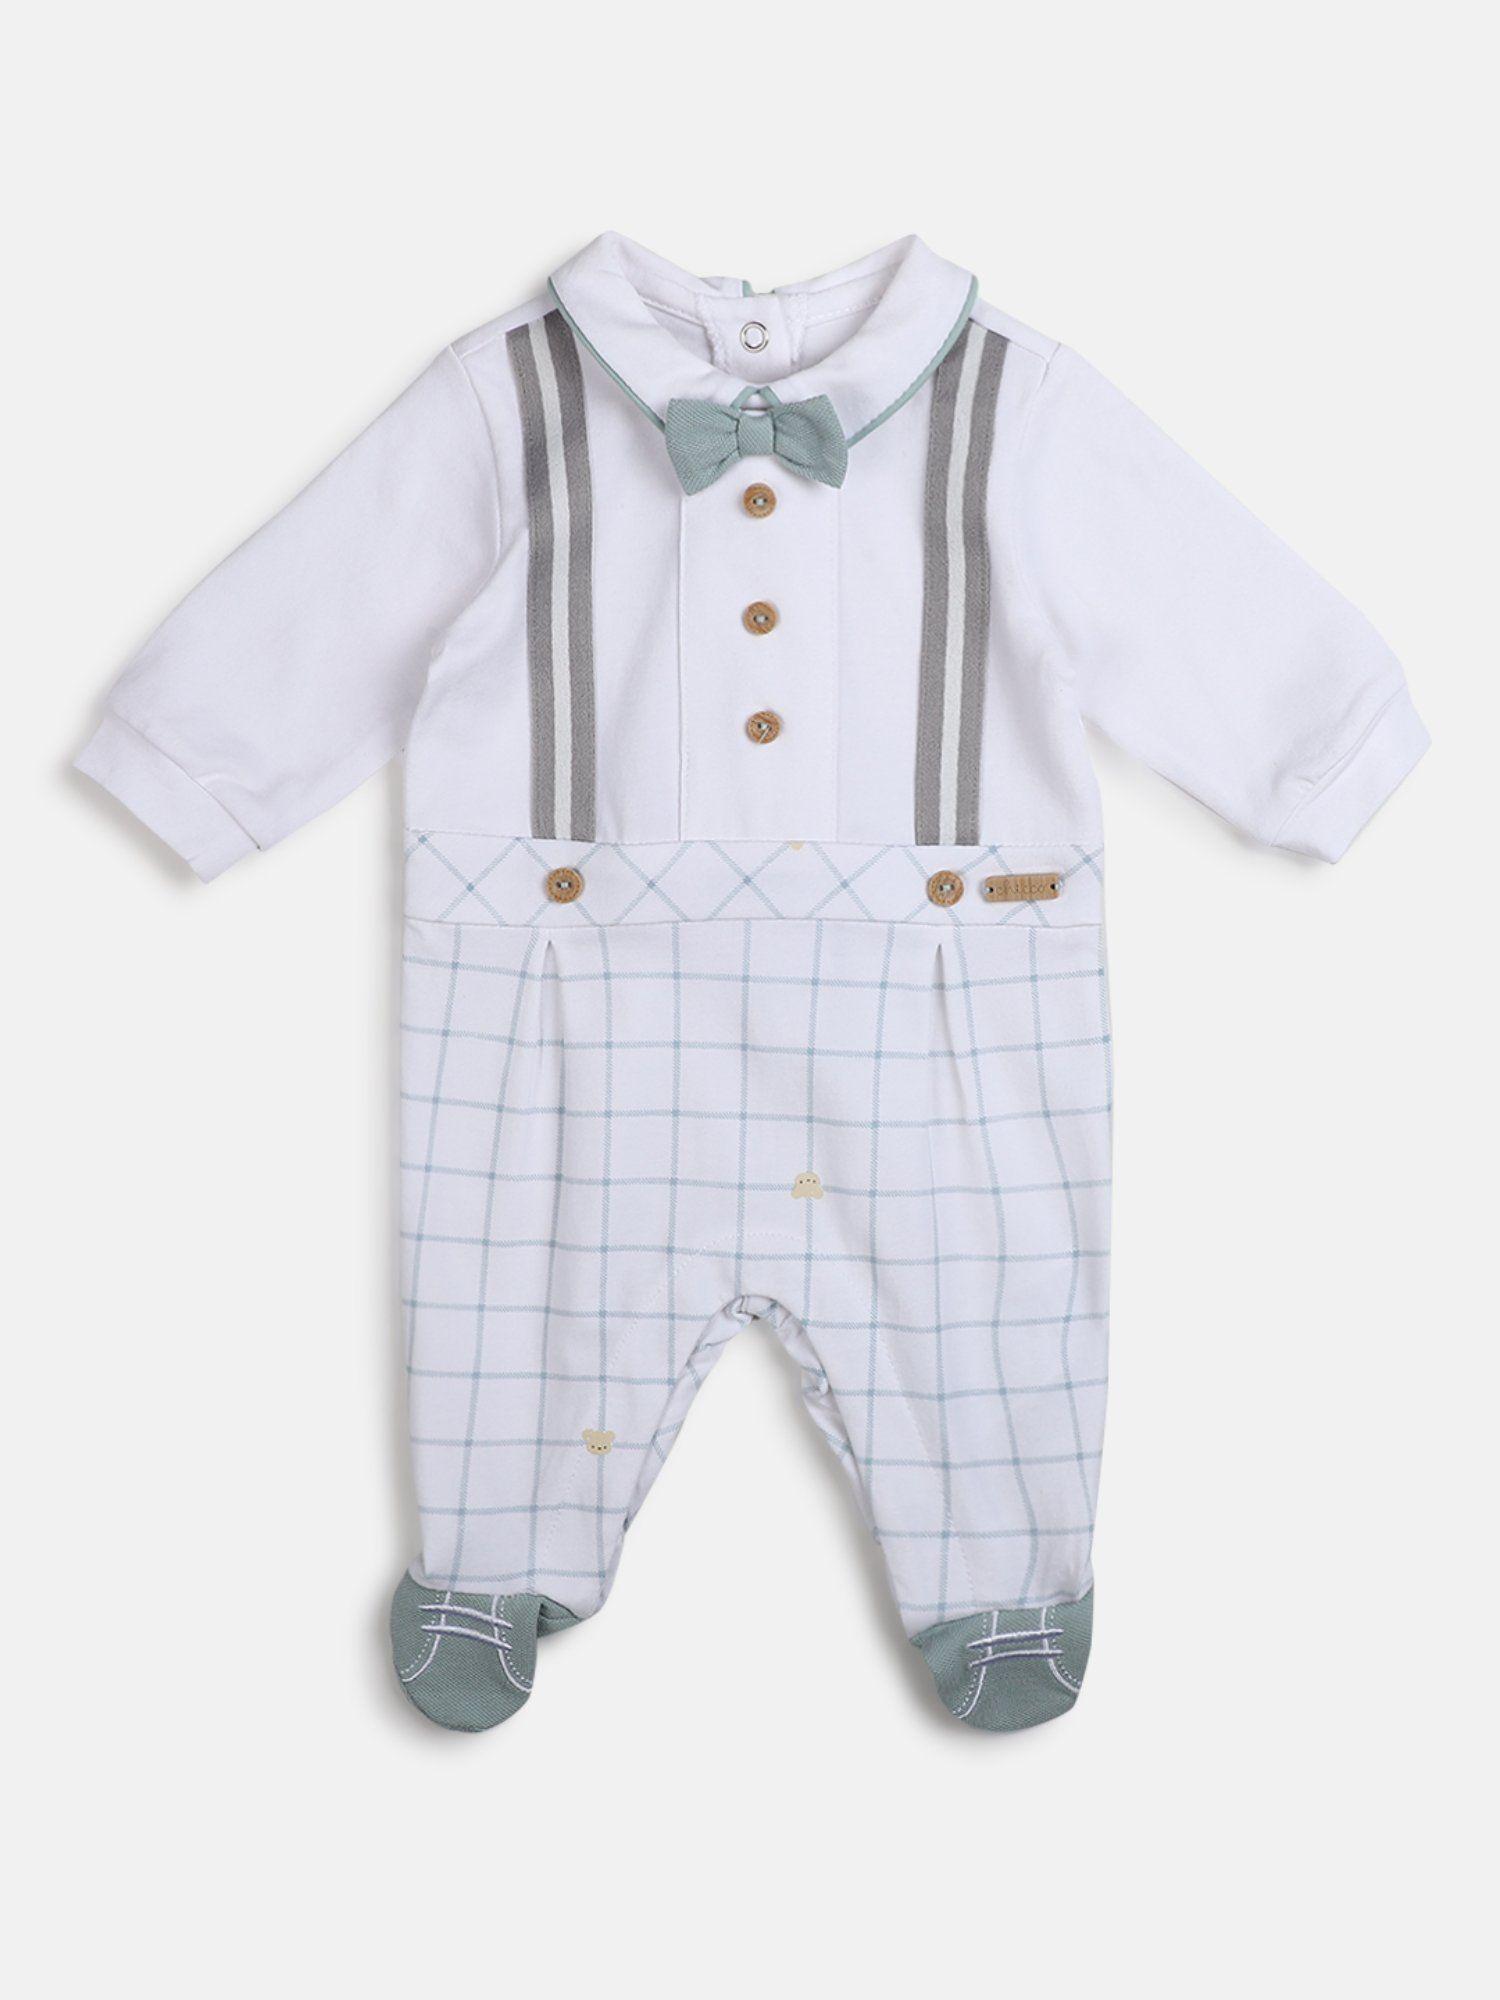 boys white stretch leg opening rompers with bow tie (set of 2)